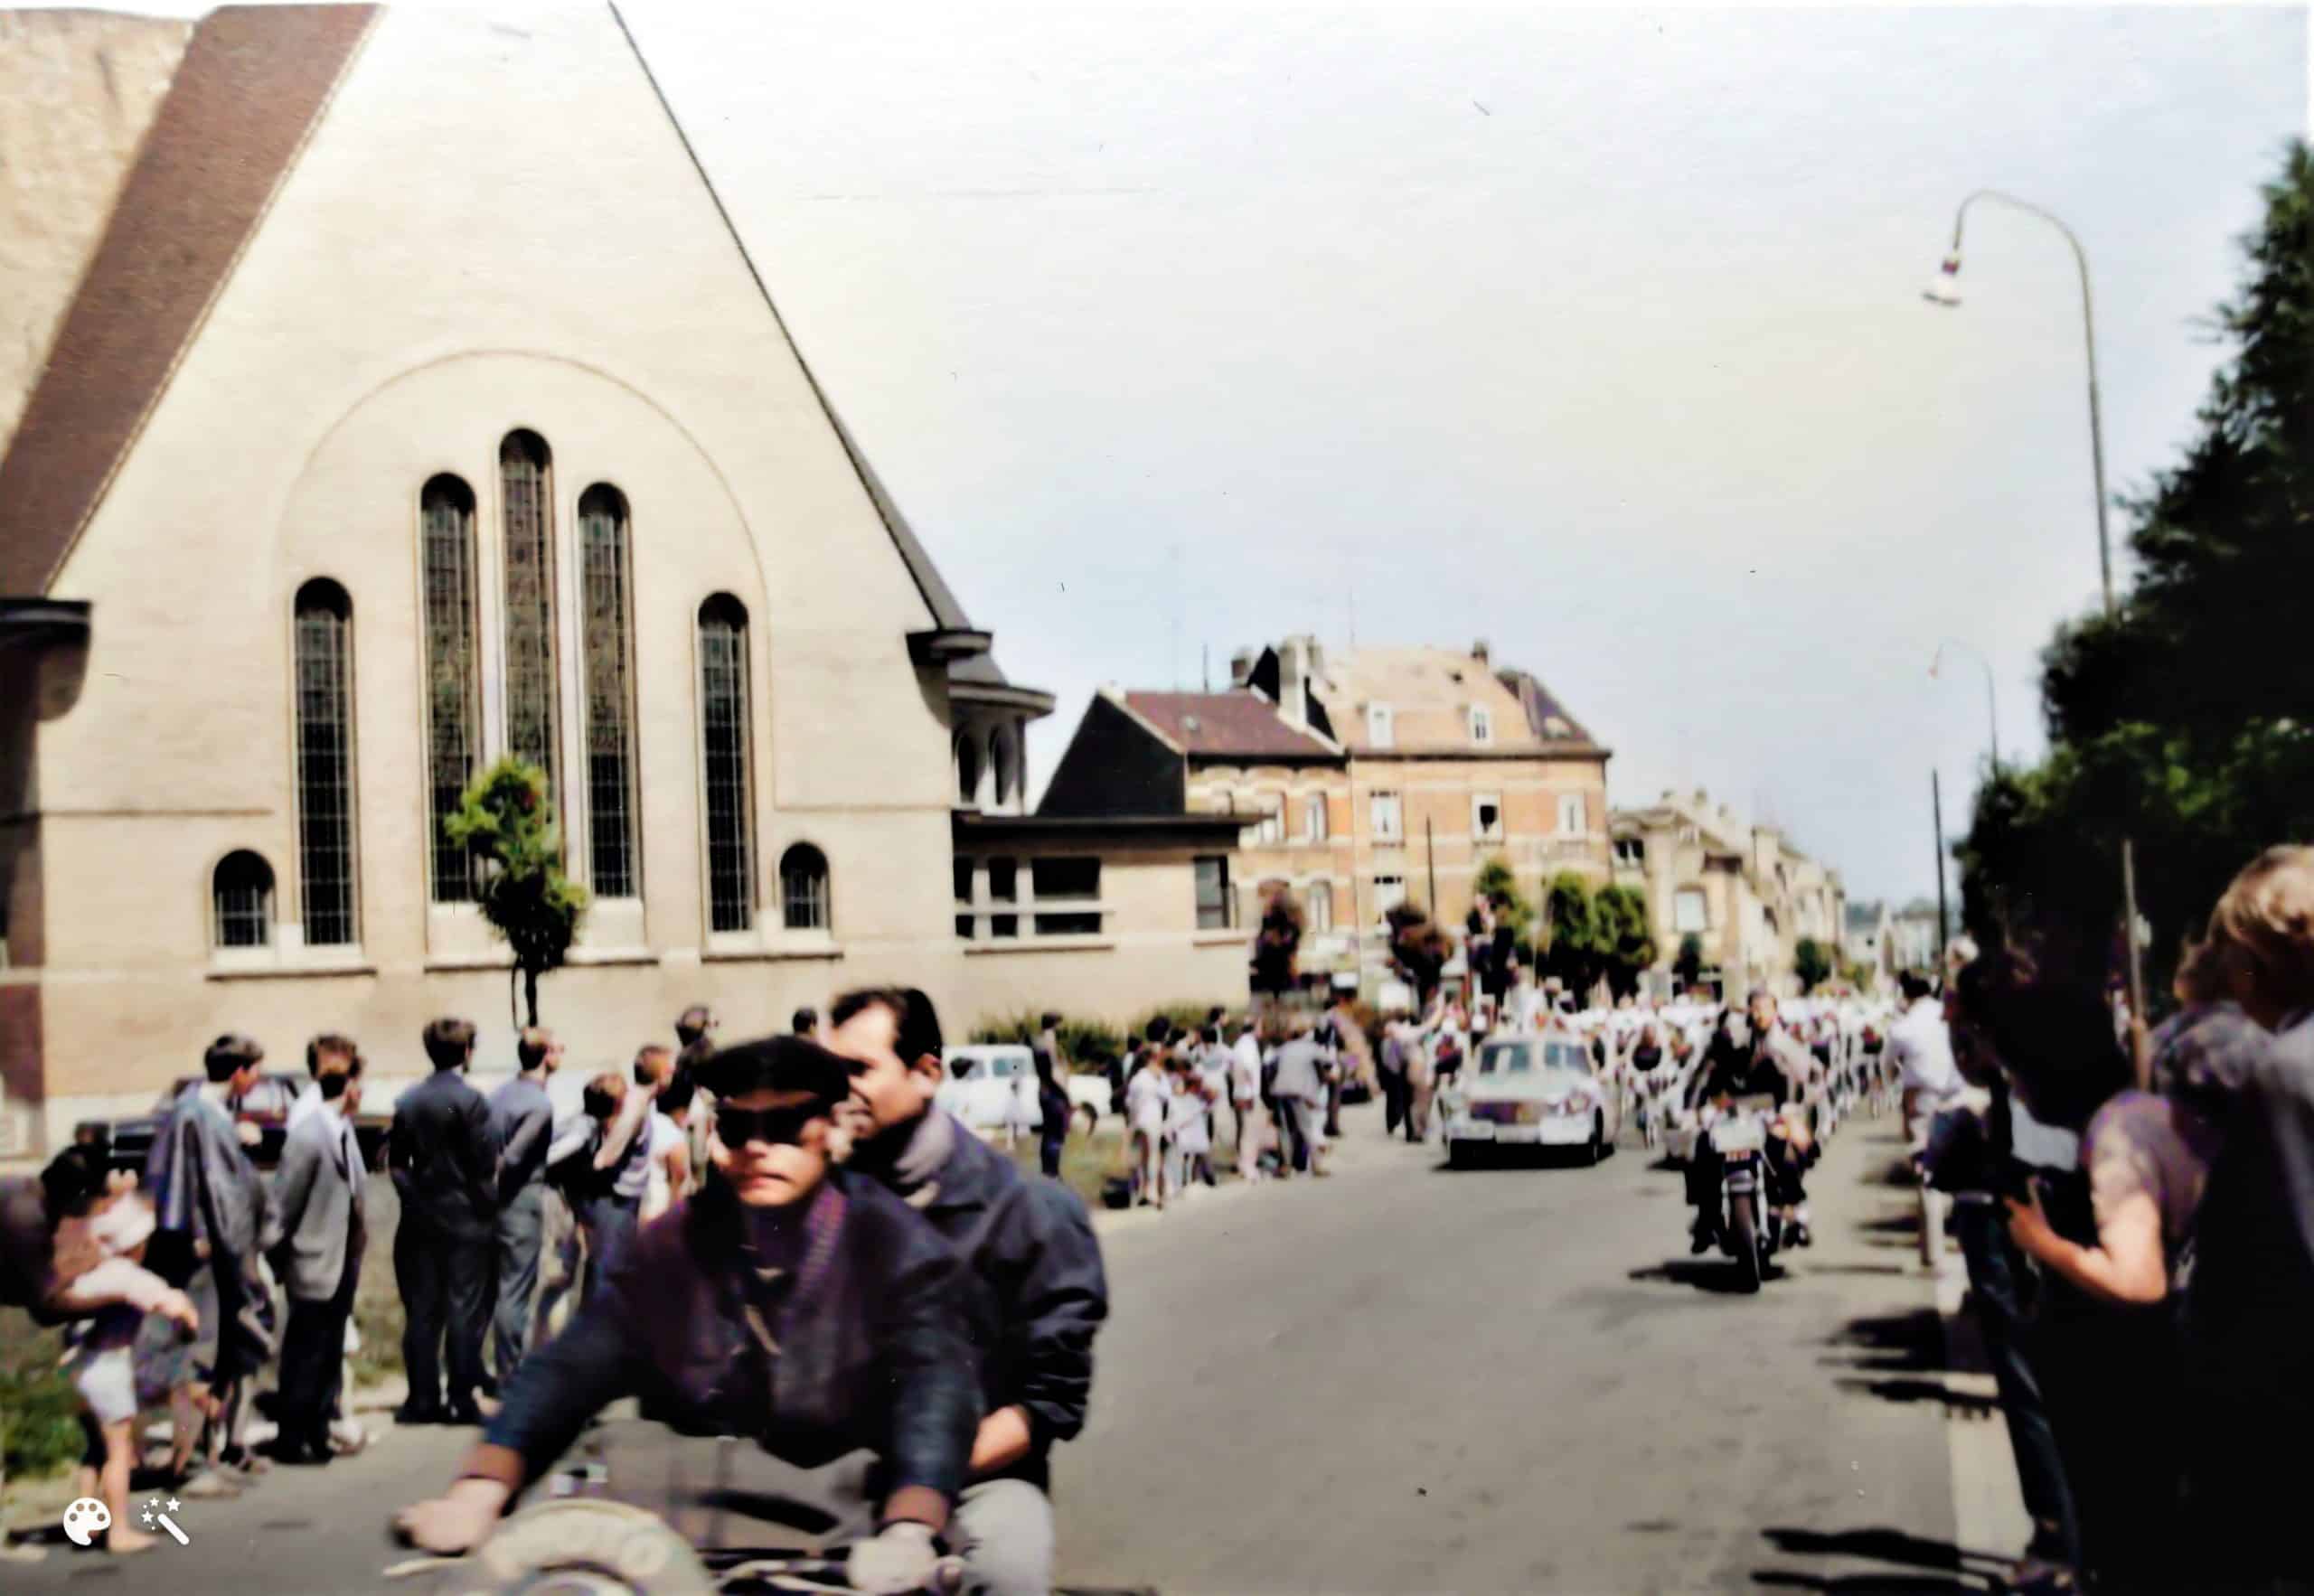 The Tour de France passes through Anderlecht in 1968. Photo courtesy of Christian Polfliet, colorized and enhanced by MyHeritage